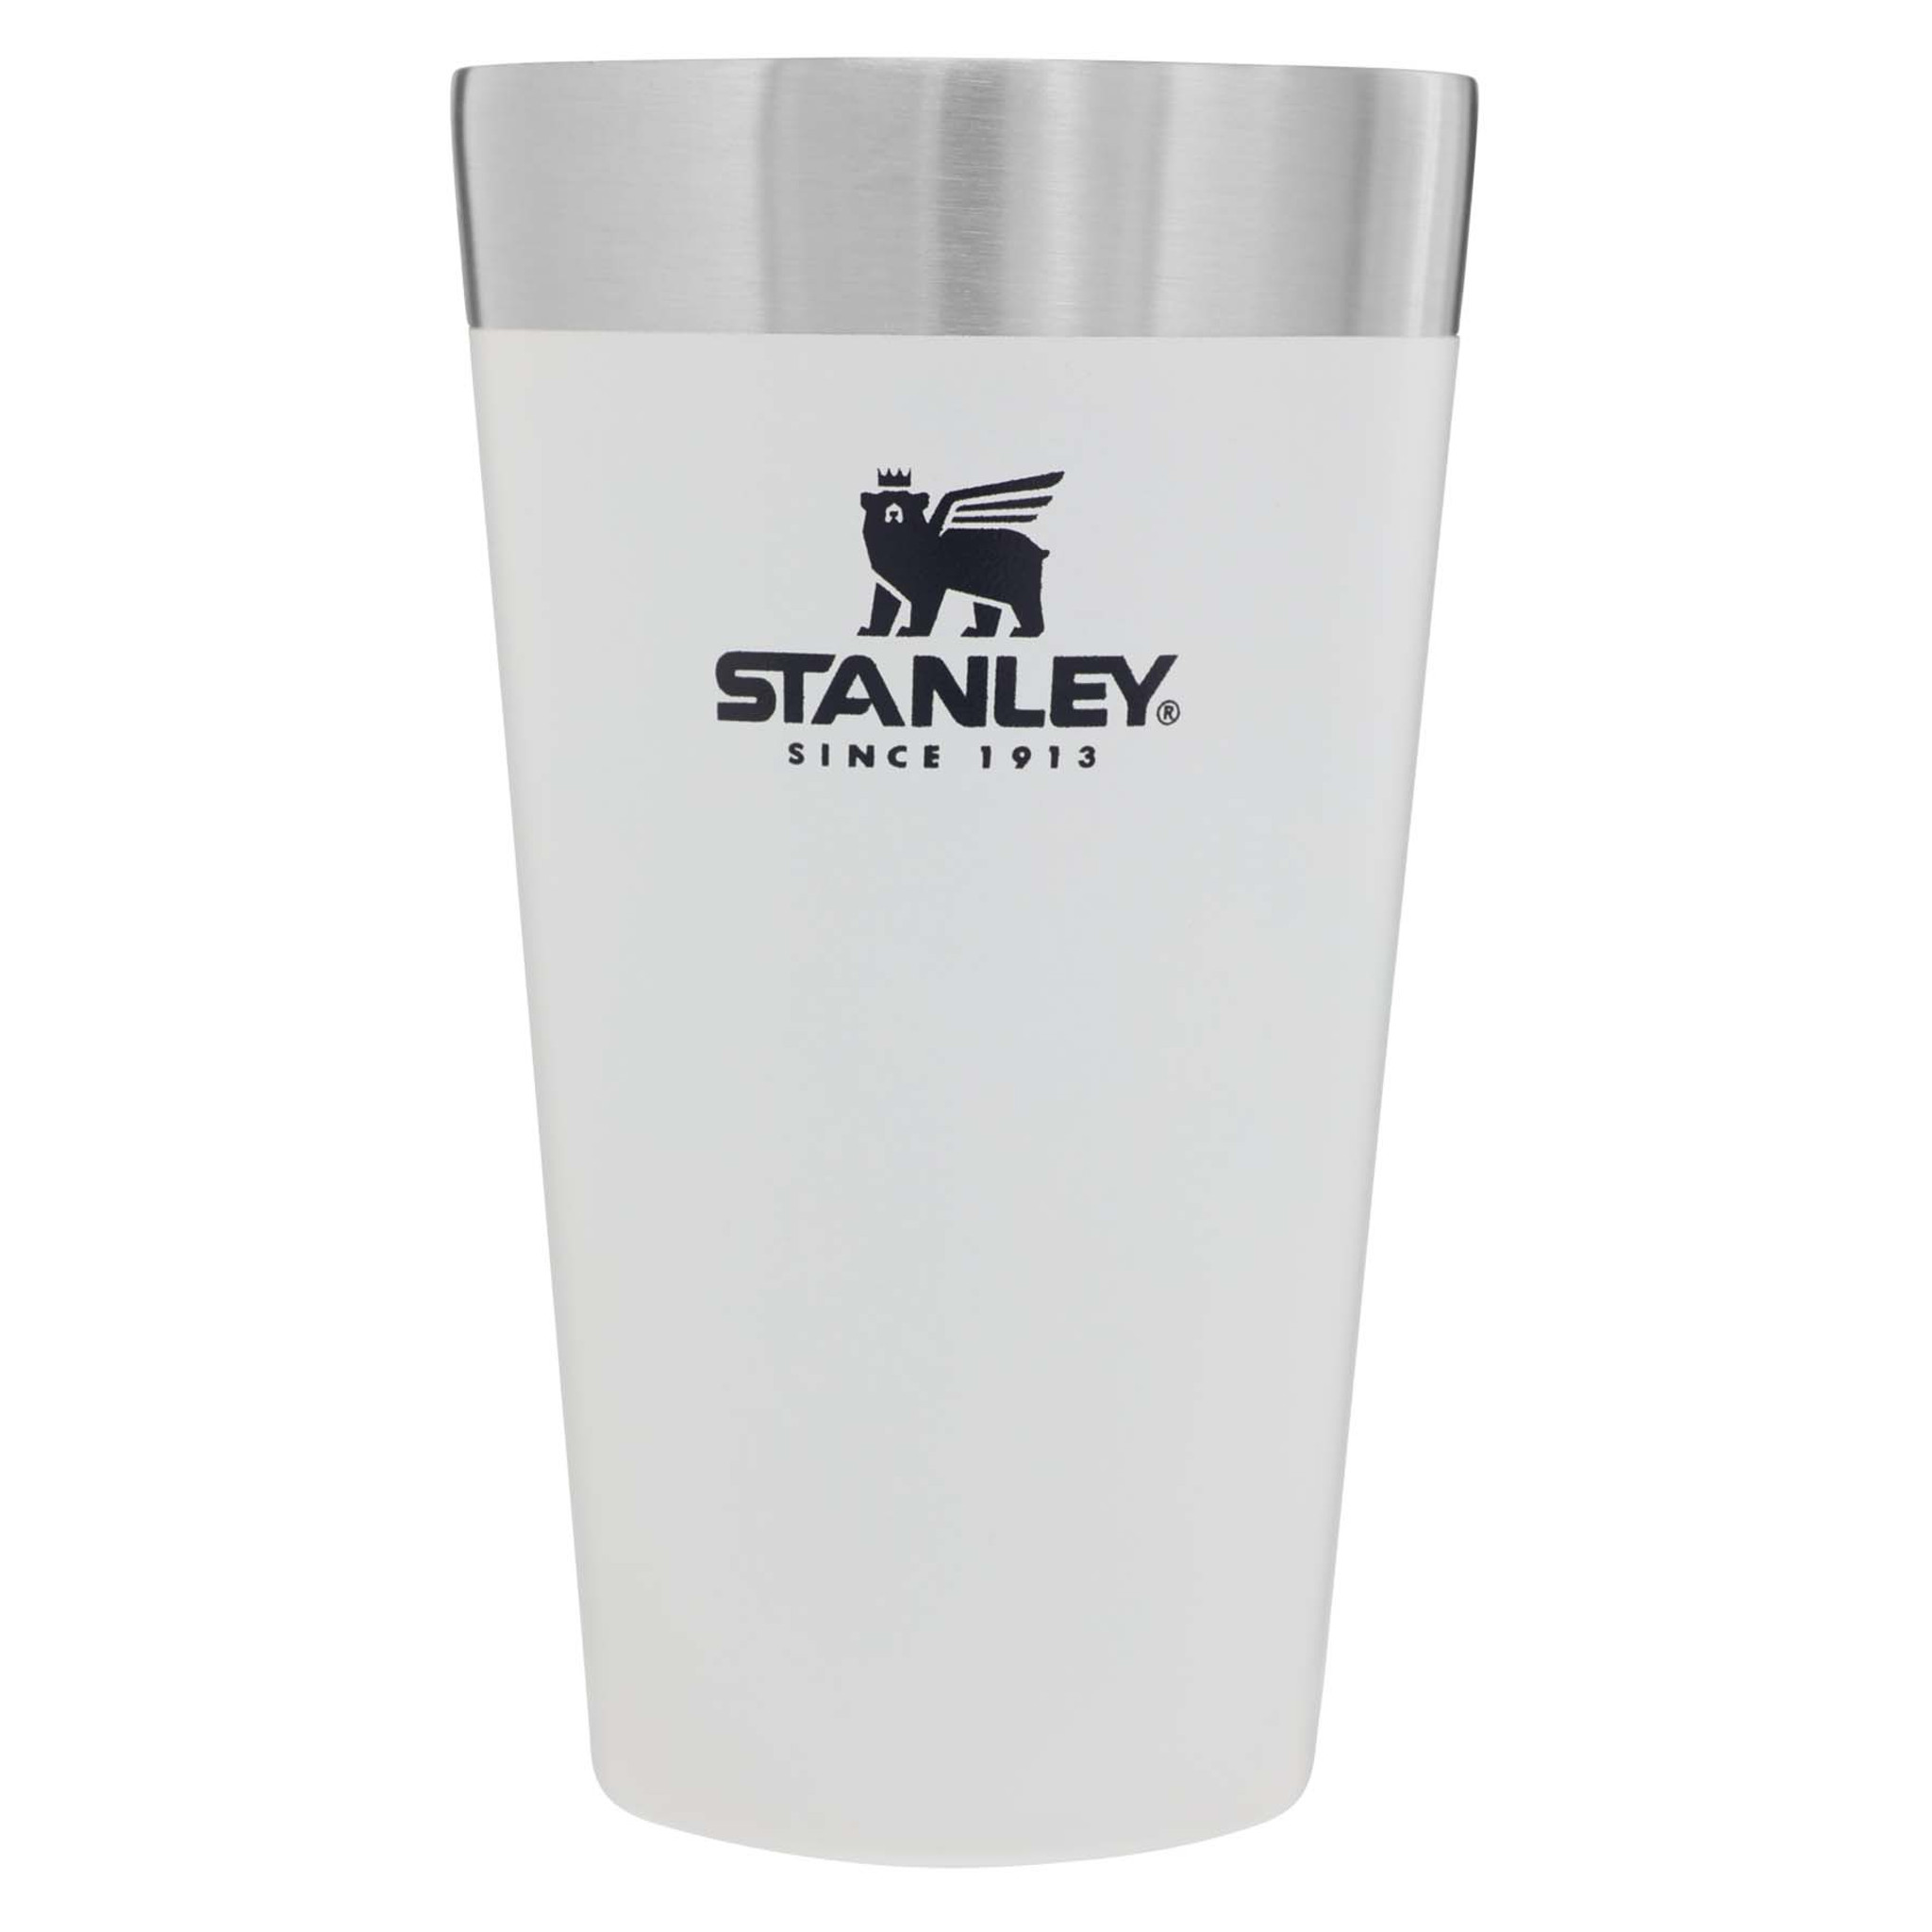 Yeti Rambler 16 oz Stackable Pint - HPG - Promotional Products